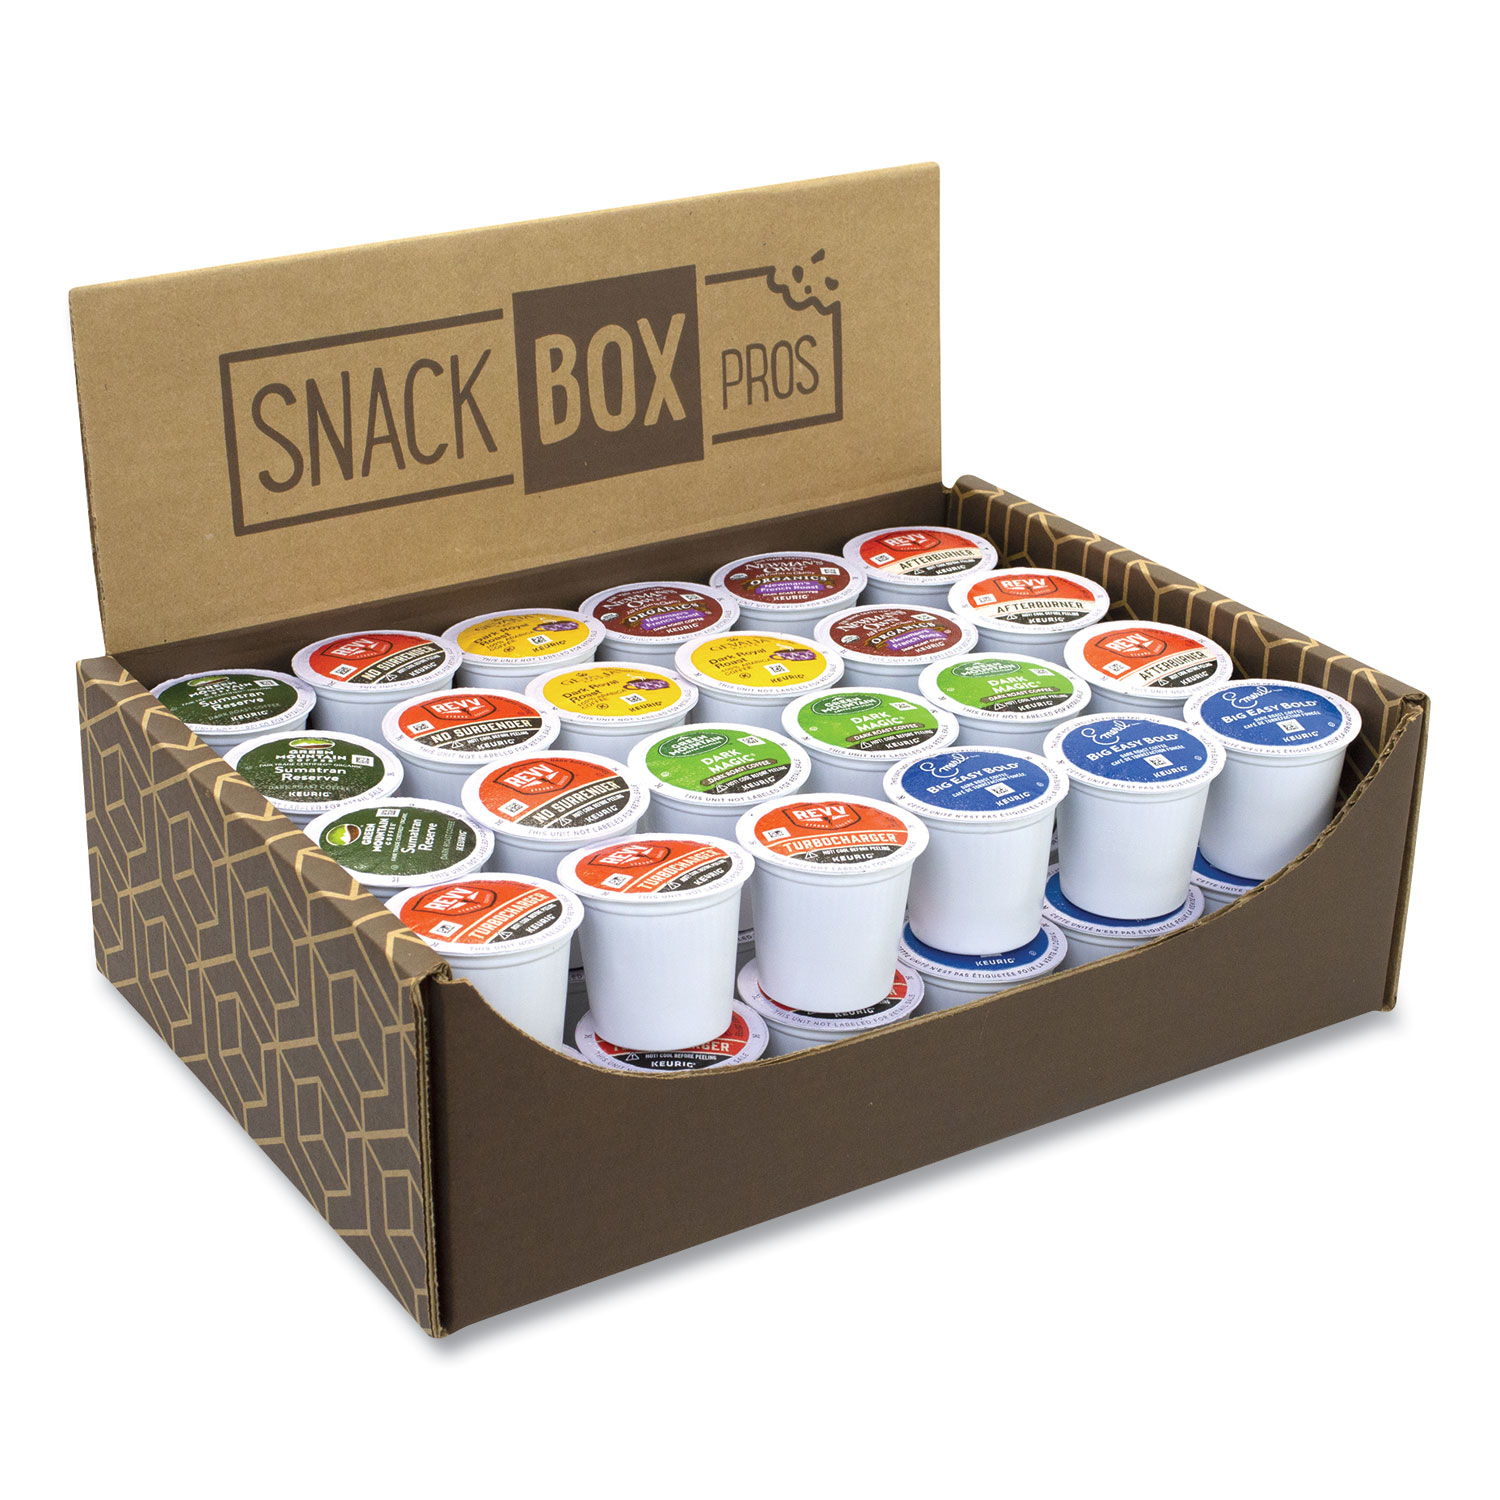  Snack Box Pros 70000040 Bold and Strong K-Cup Assortment, 48/Box, Free Delivery in 1-4 Business Days (GRR70000040) 